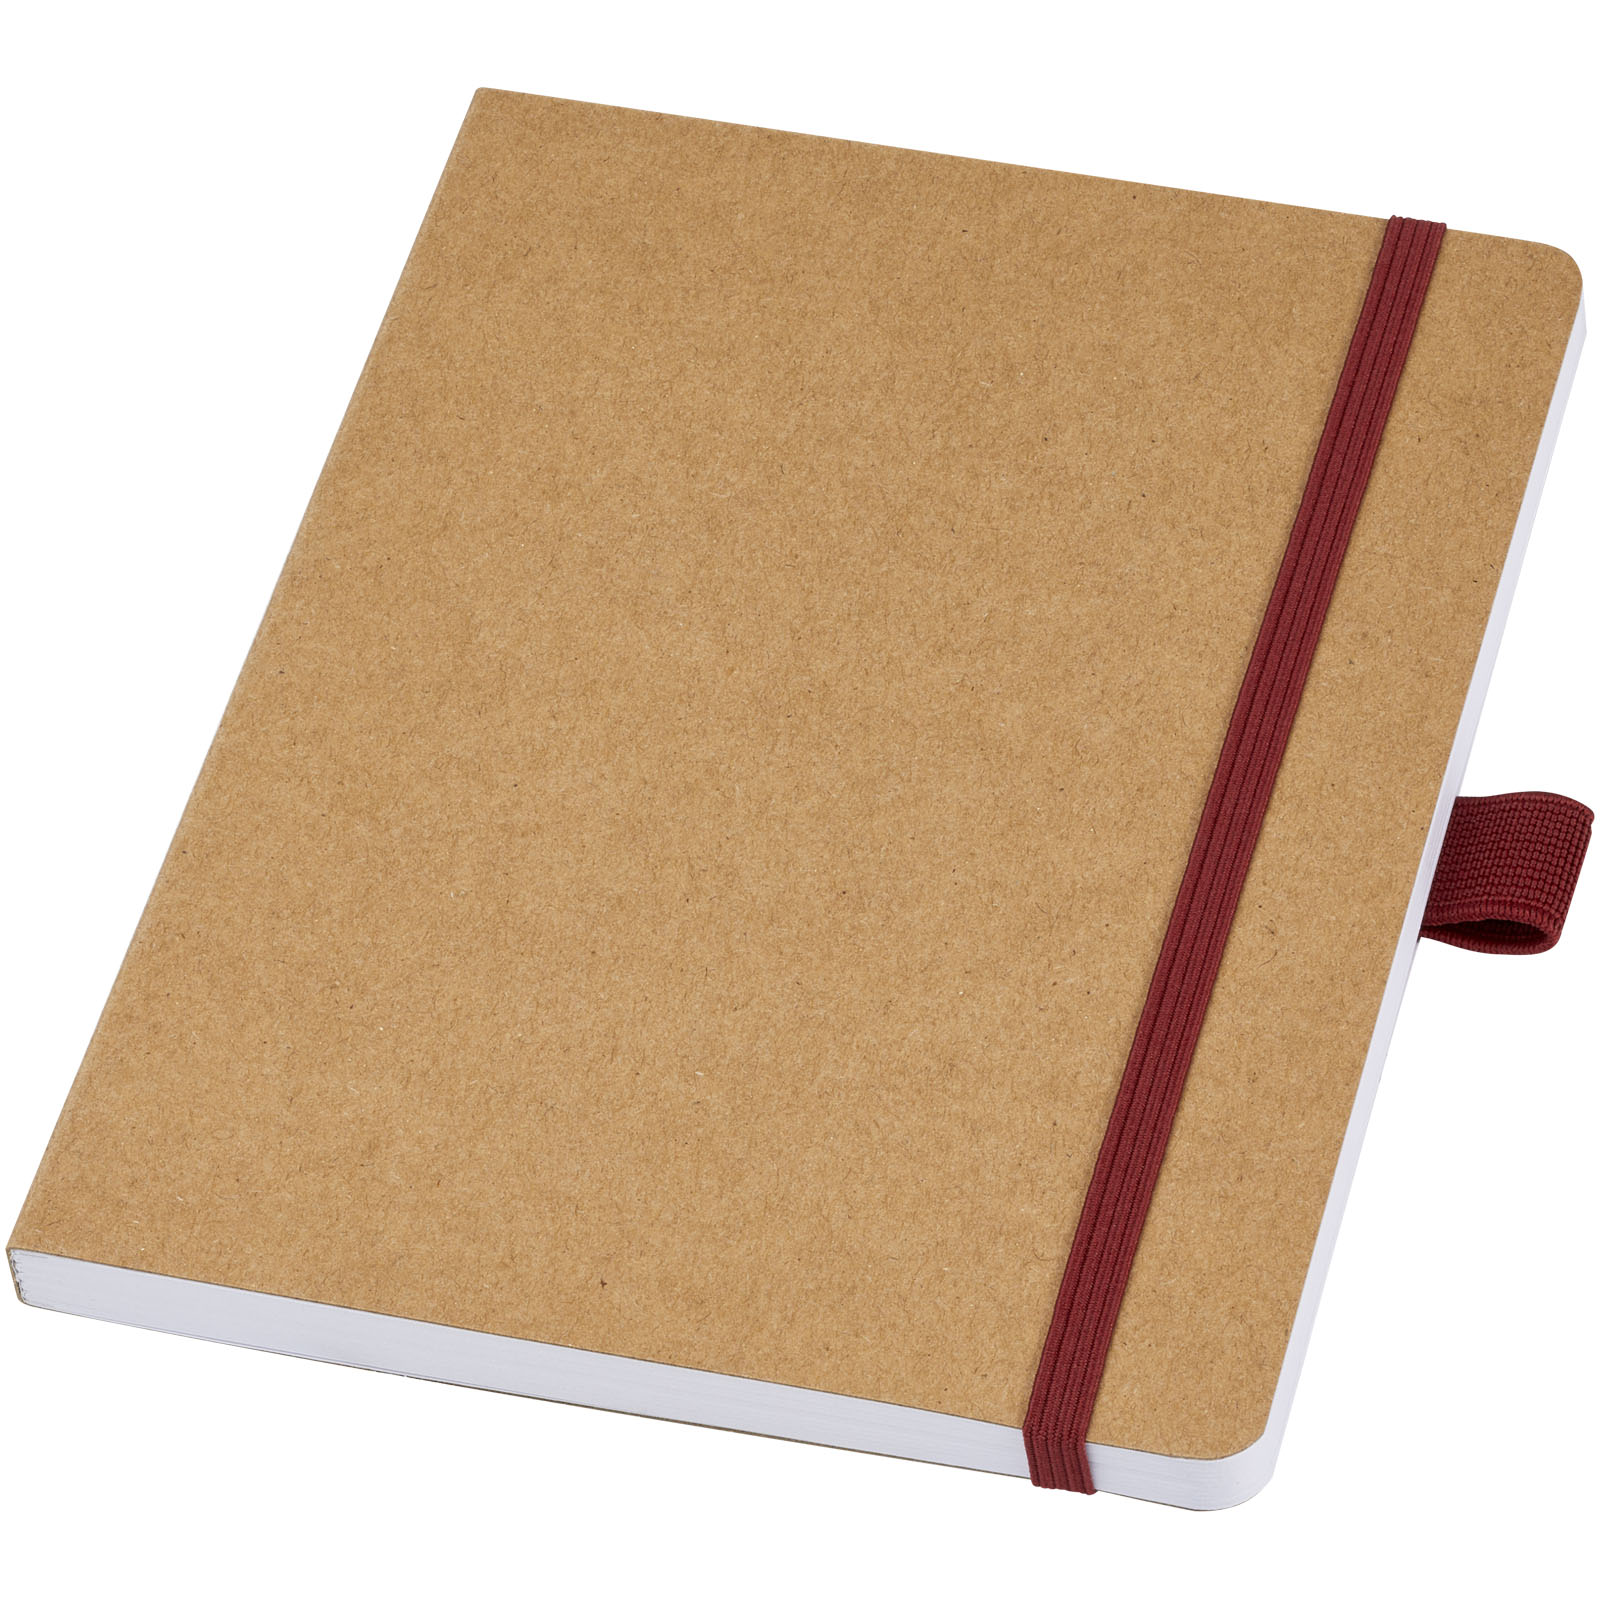 Soft cover notebooks - Berk recycled paper notebook